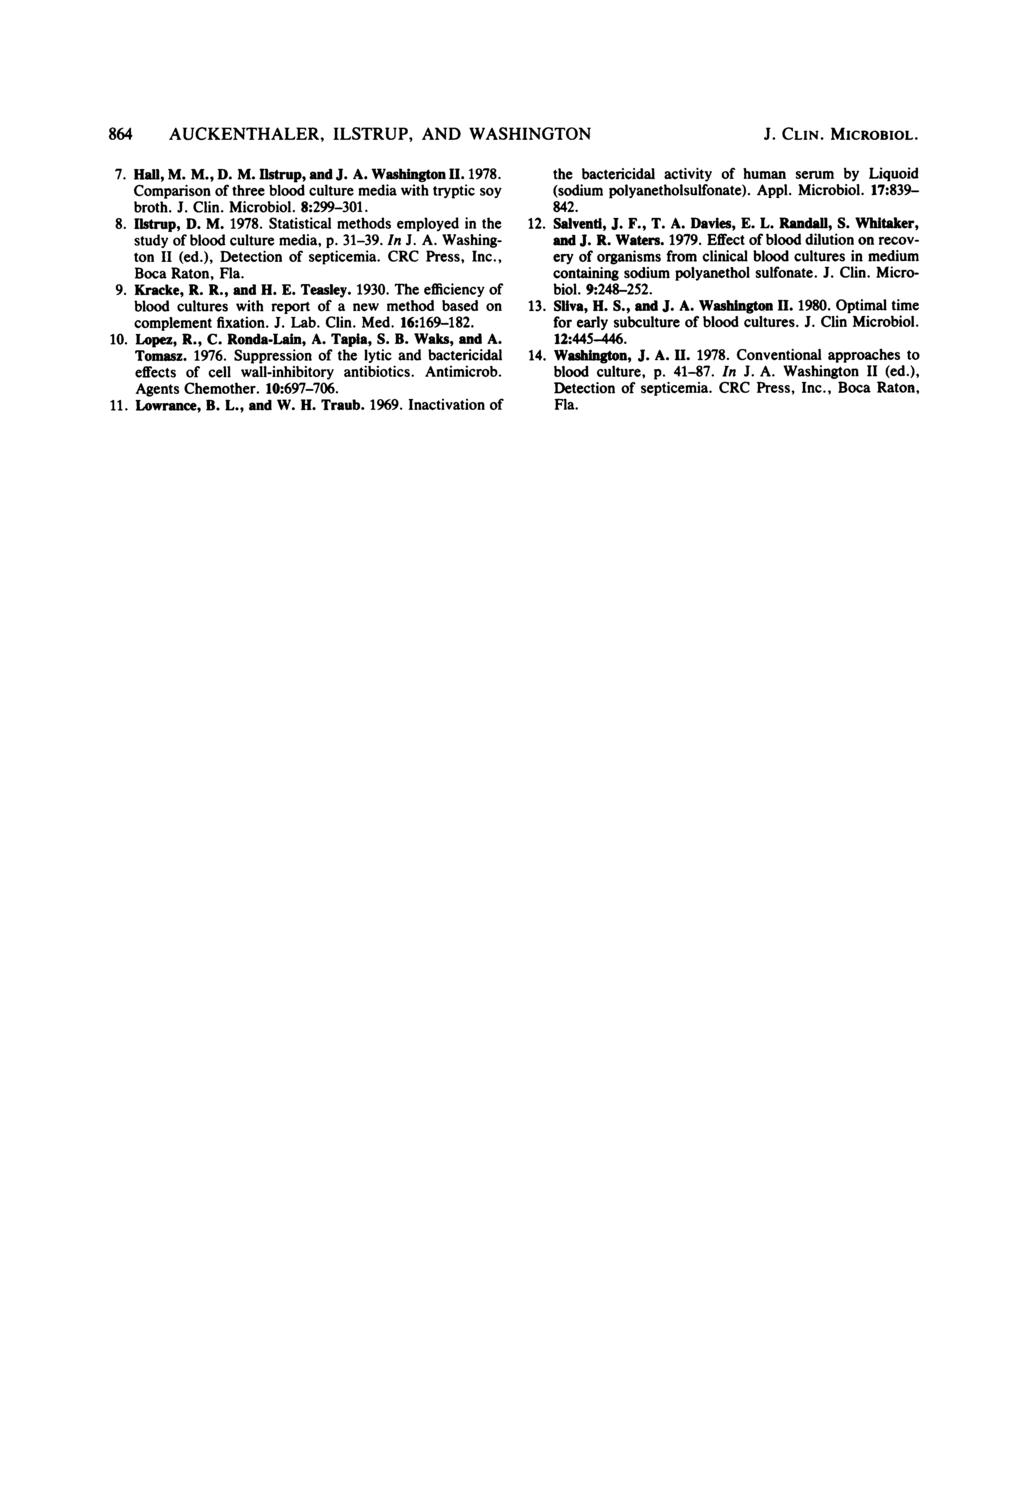 864 AUCKENTHALER, ILSTRUP, AND WASHINGTON J. CLIN. MICROBIOL. 7. Hall, M. M., D. M. Ilstrup, and J. A. Washington 1. 1978. Comparison of three blood culture media with tryptic soy broth. J. Clin.